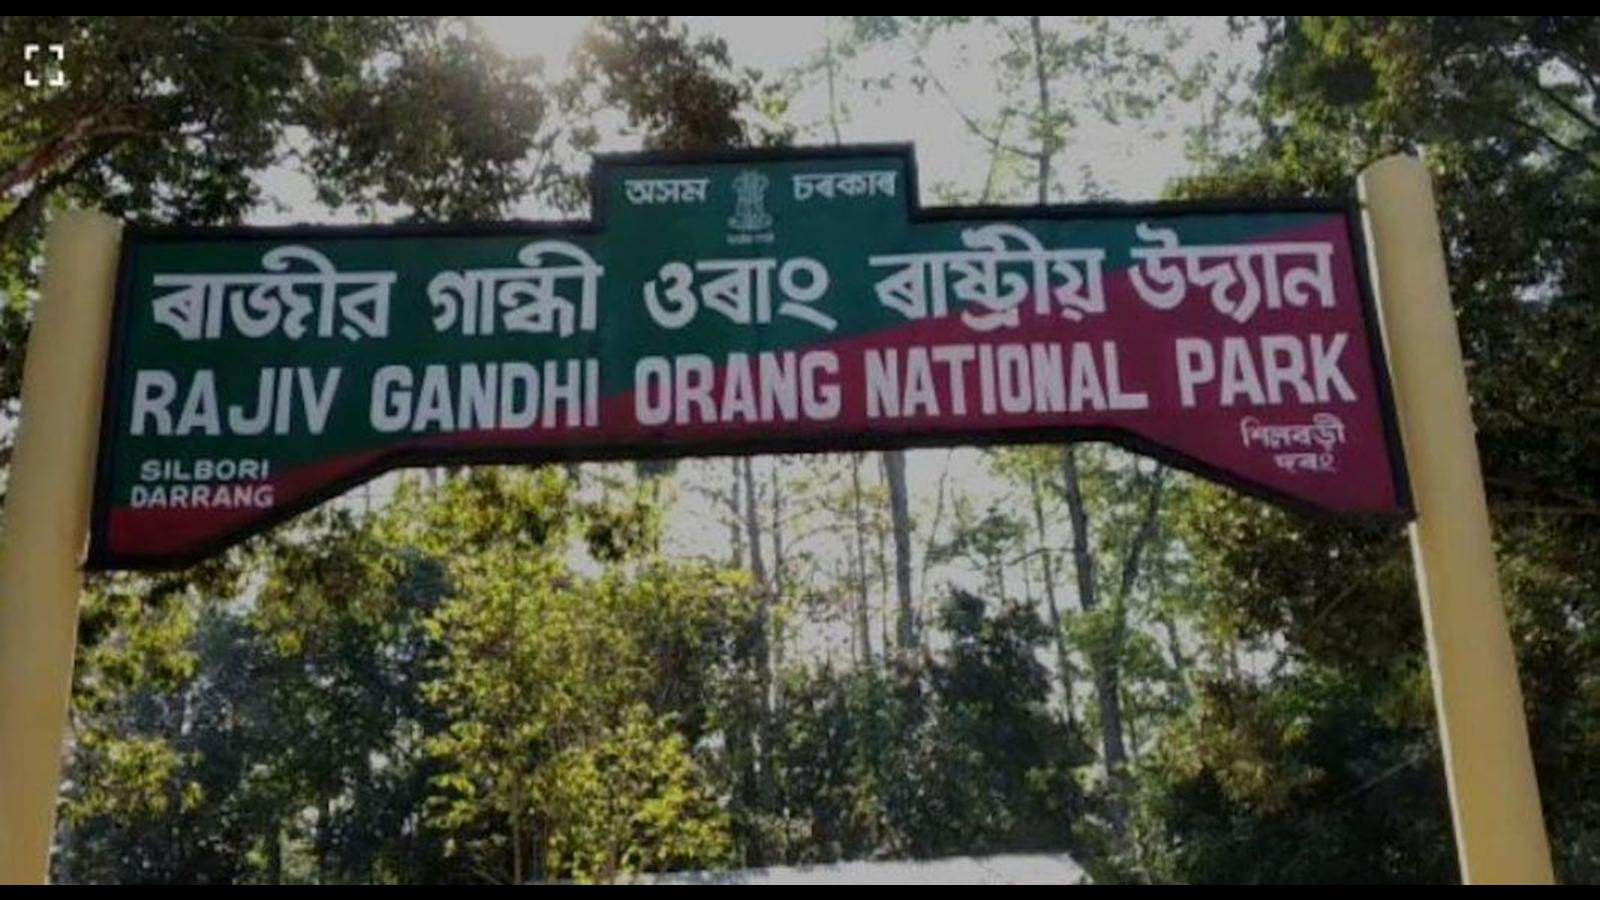 Asom Park Xxx Vedeo - Assam cabinet decides to remove Rajiv Gandhi's name from Orang national park  | Latest News India - Hindustan Times